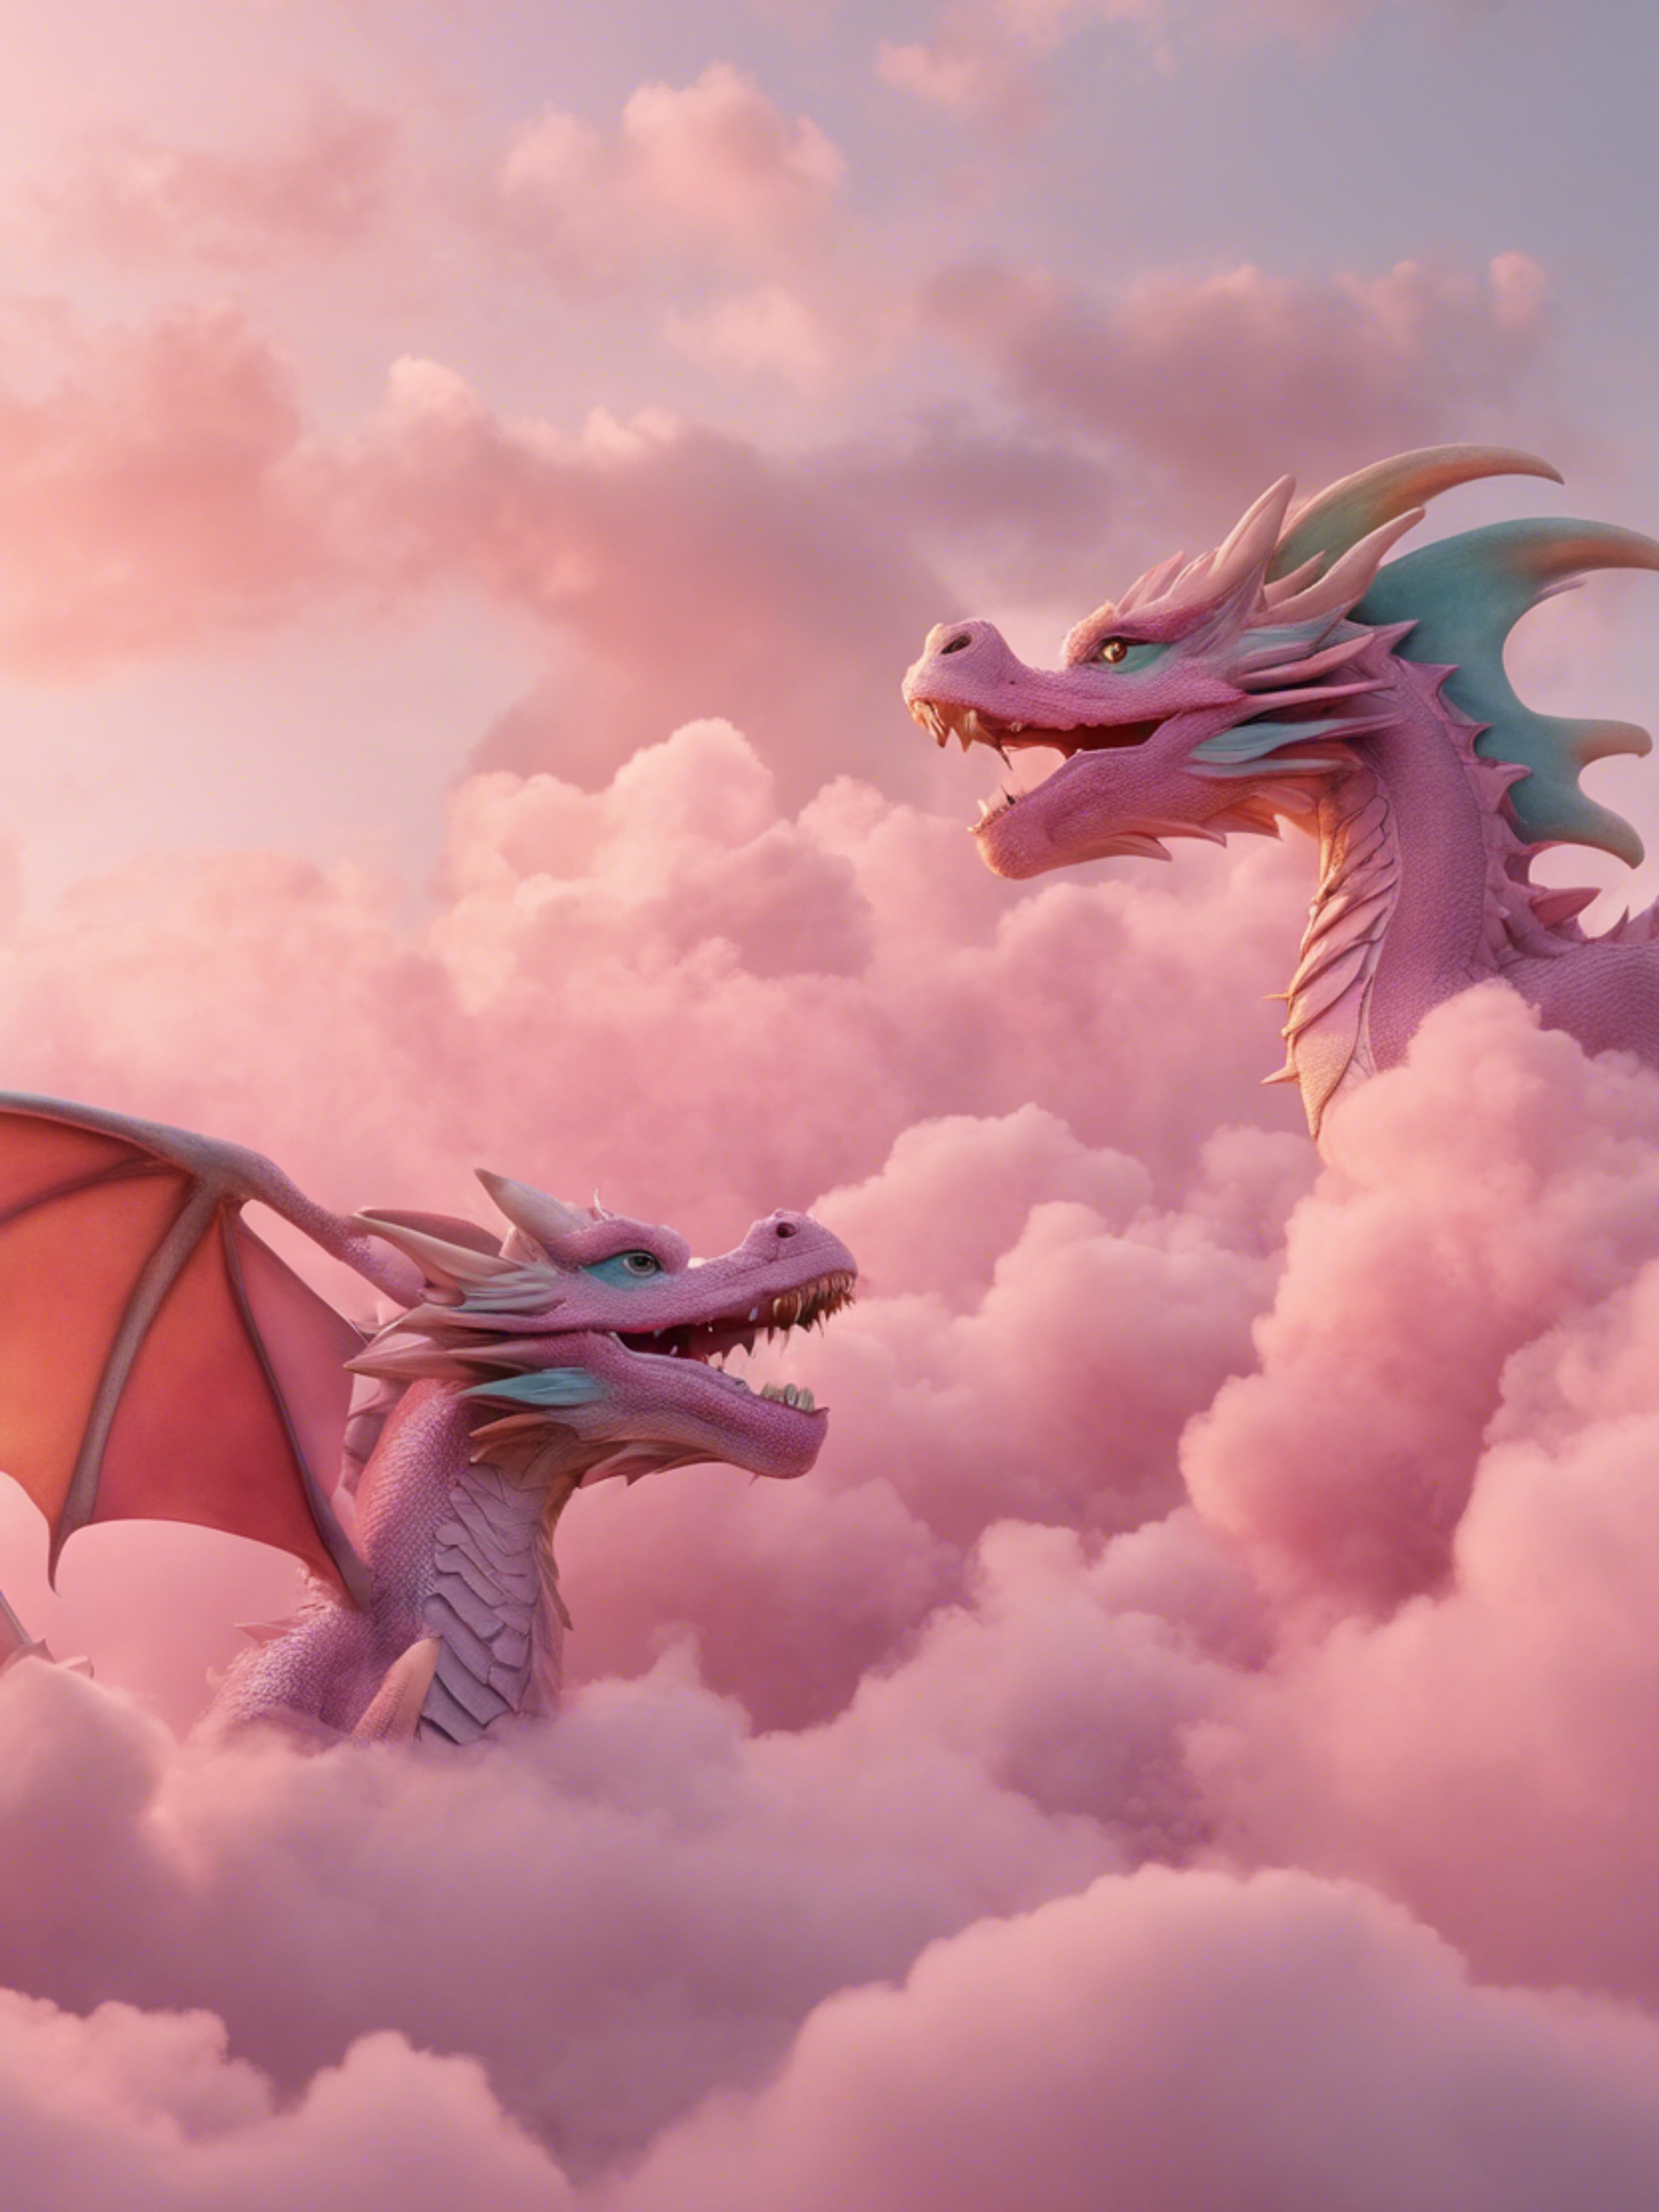 Trio of playful pastel-colored dragons flitting among fluffy pink clouds during sunrise.壁紙[e1ca69721ca941939a18]